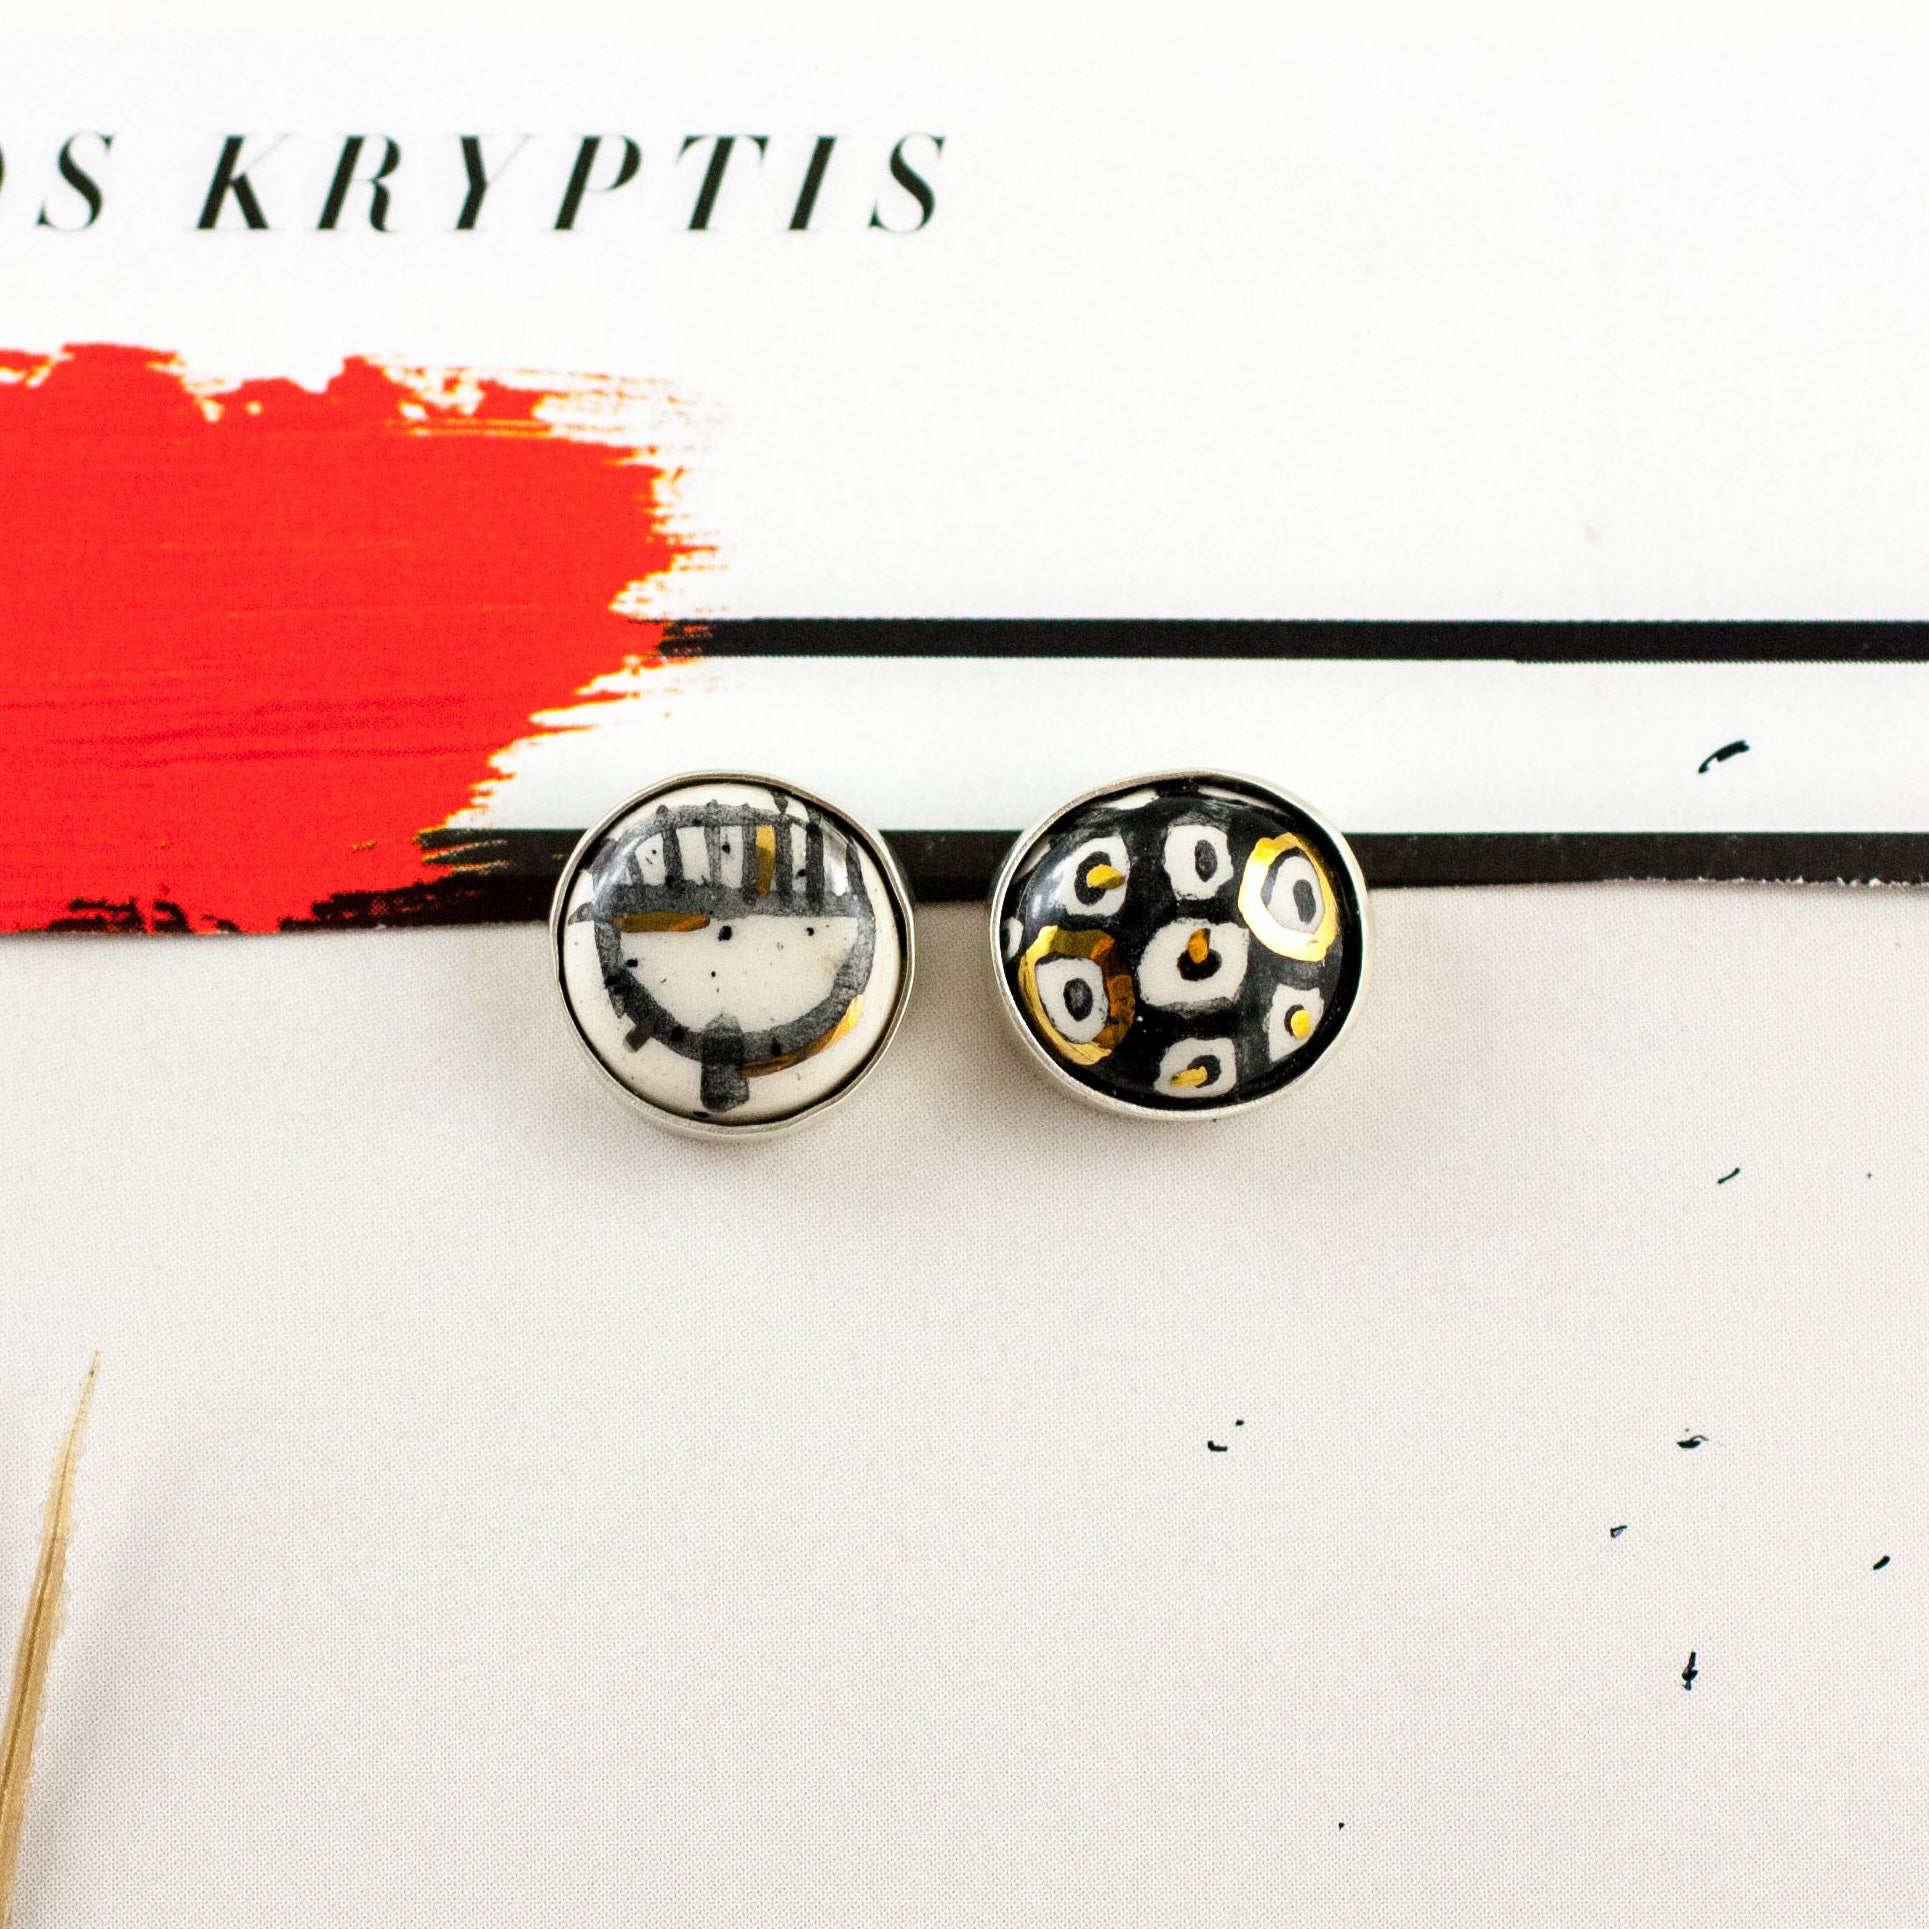 ABSTRACT white and black earrings with spots